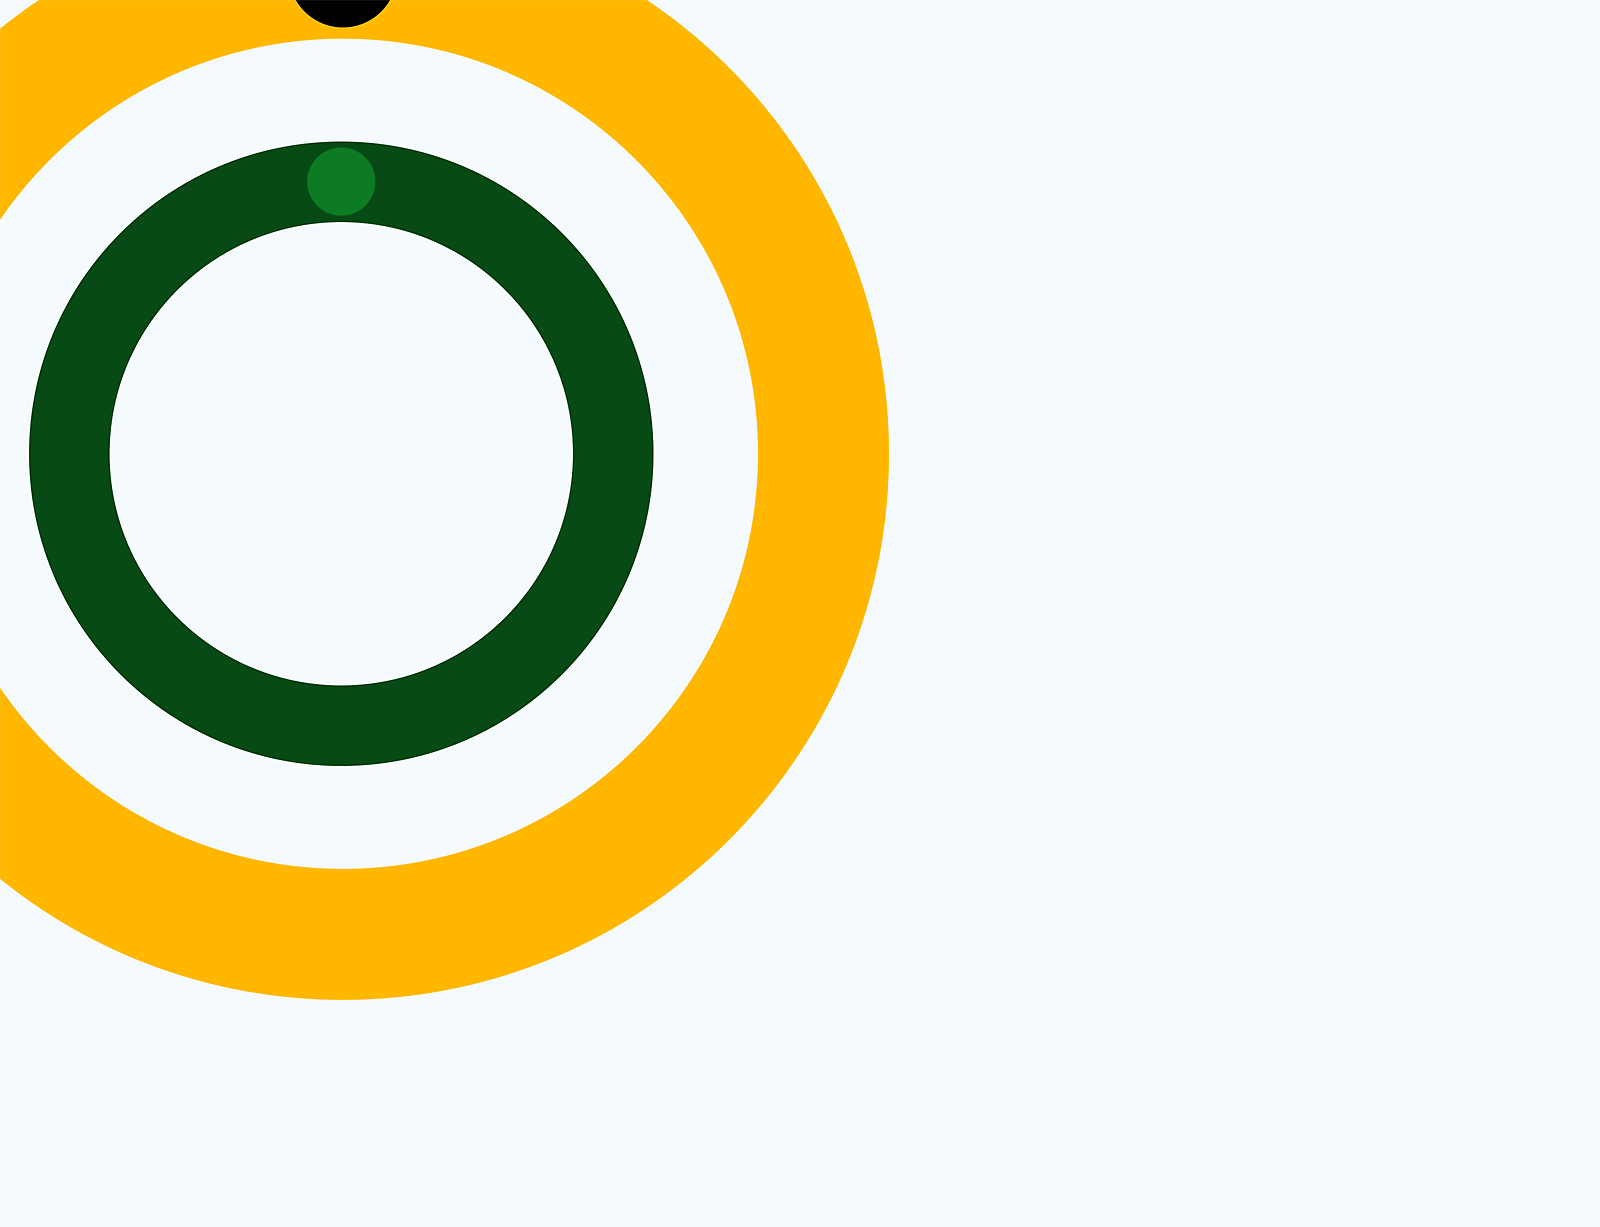 Abstract graphic of concentric circles in green, yellow, and white on a gray background.